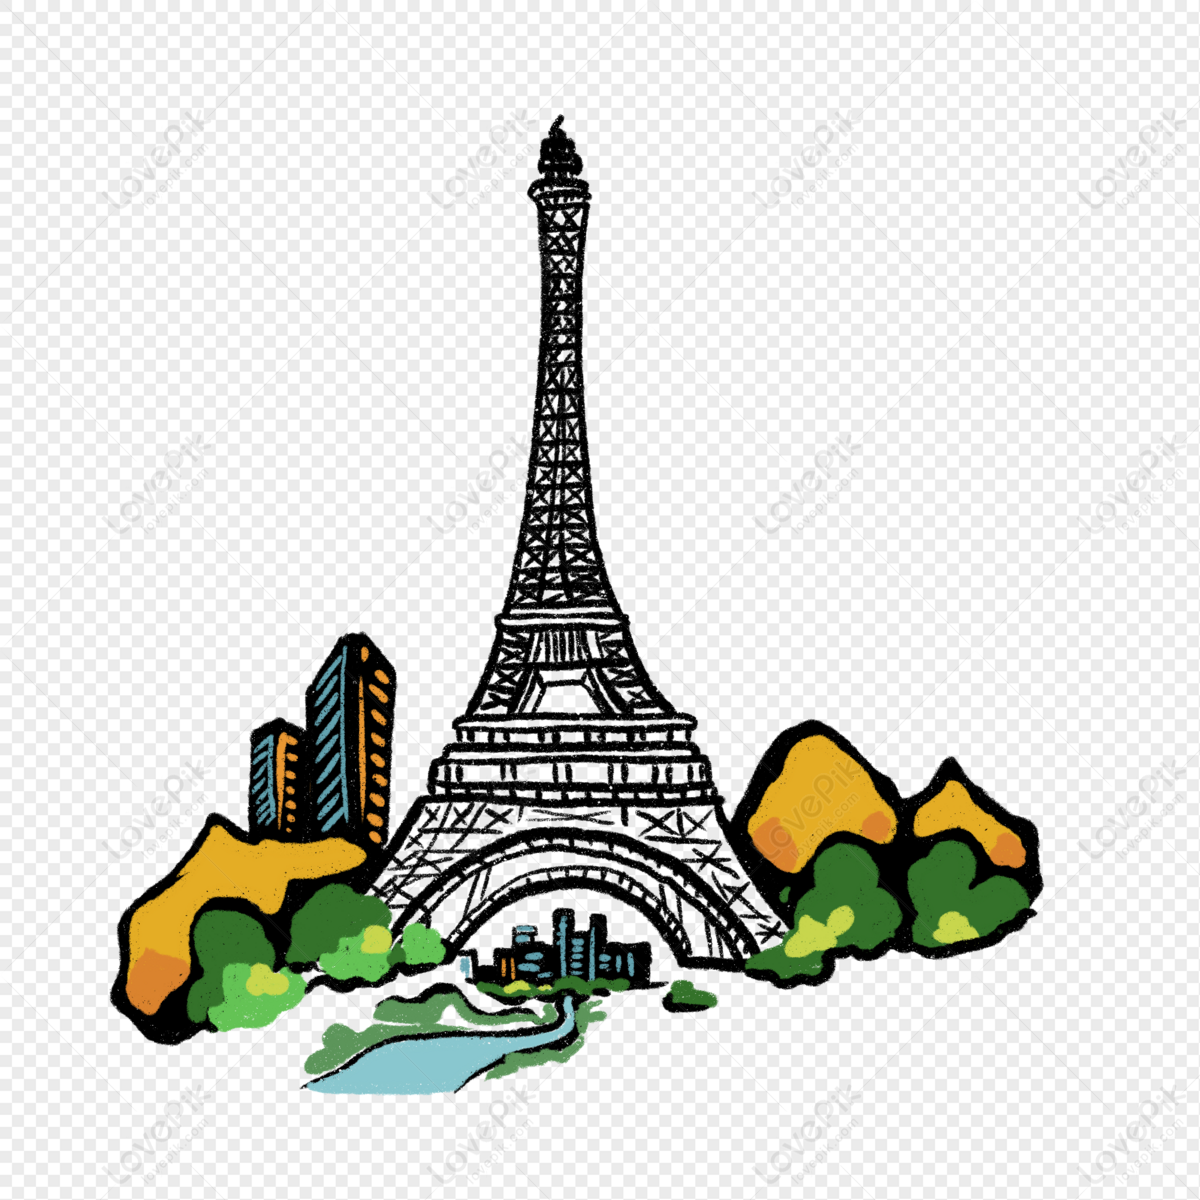 Cartoon Paris Eiffel Tower PNG Hd Transparent Image And Clipart Image For  Free Download - Lovepik | 401318034